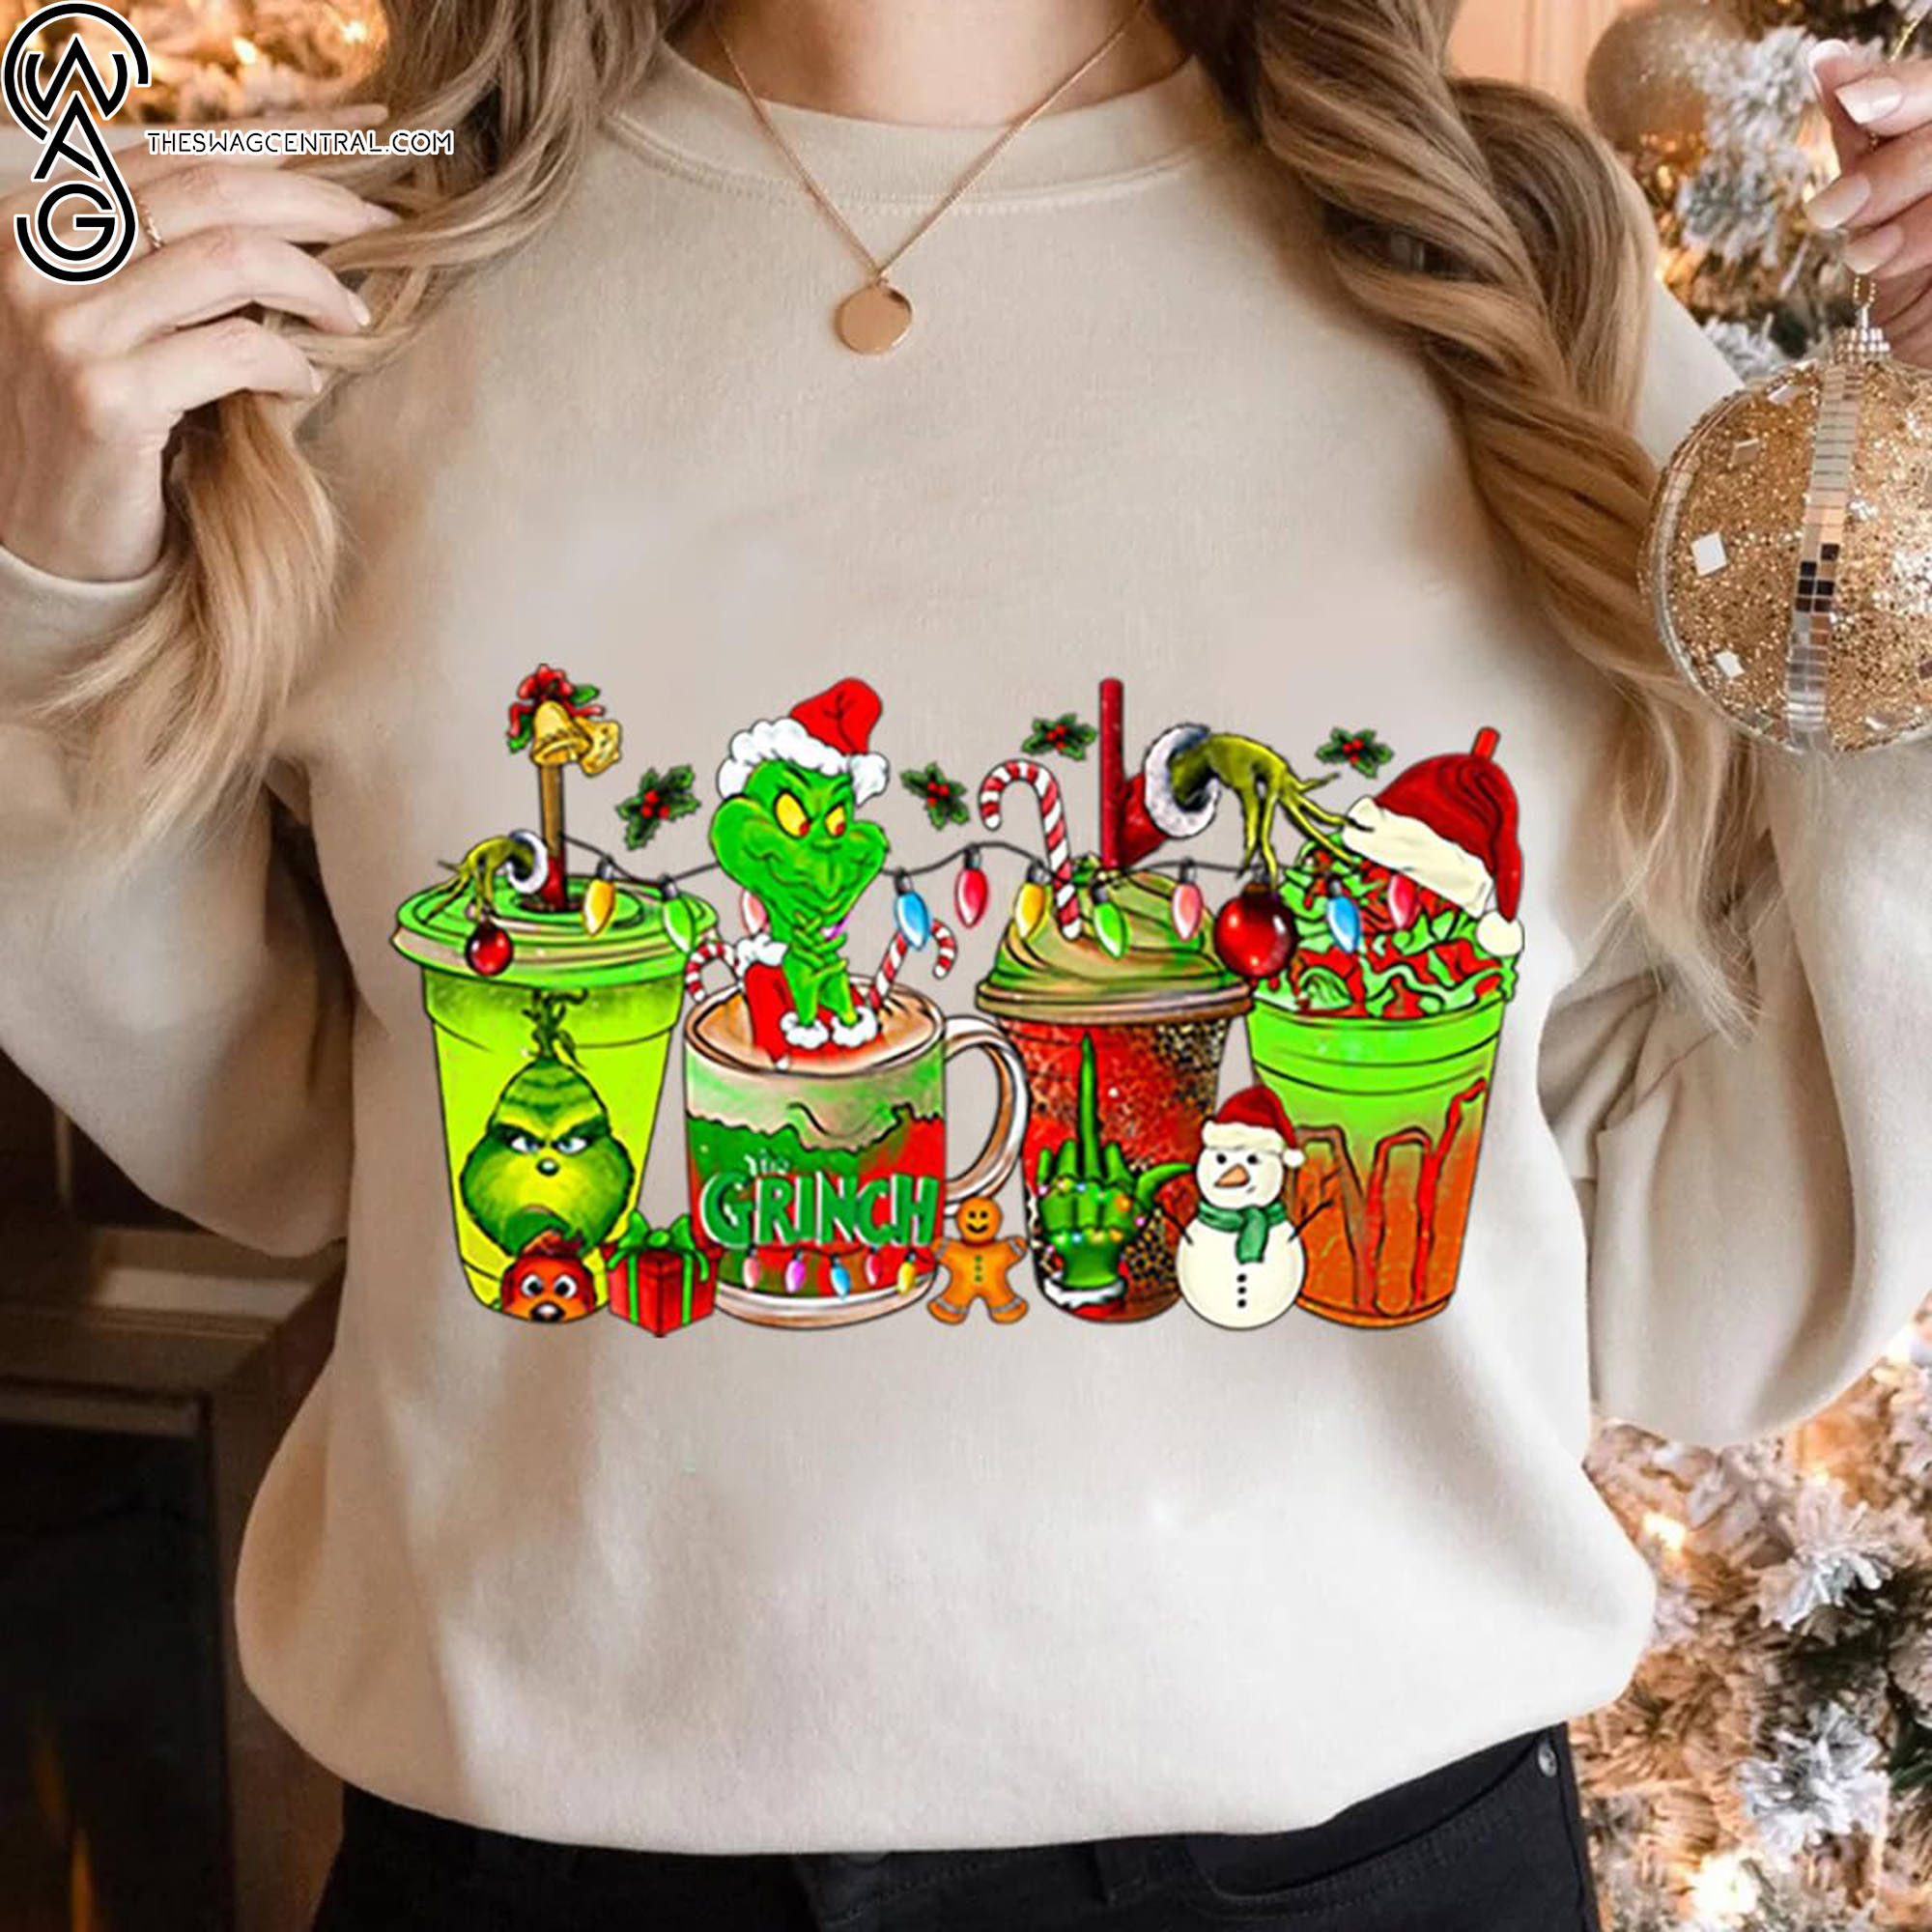 Embrace the Holiday Cheer with Grinchy Sweatshirts and Sweaters The Ultimate Christmas Gift Guide!